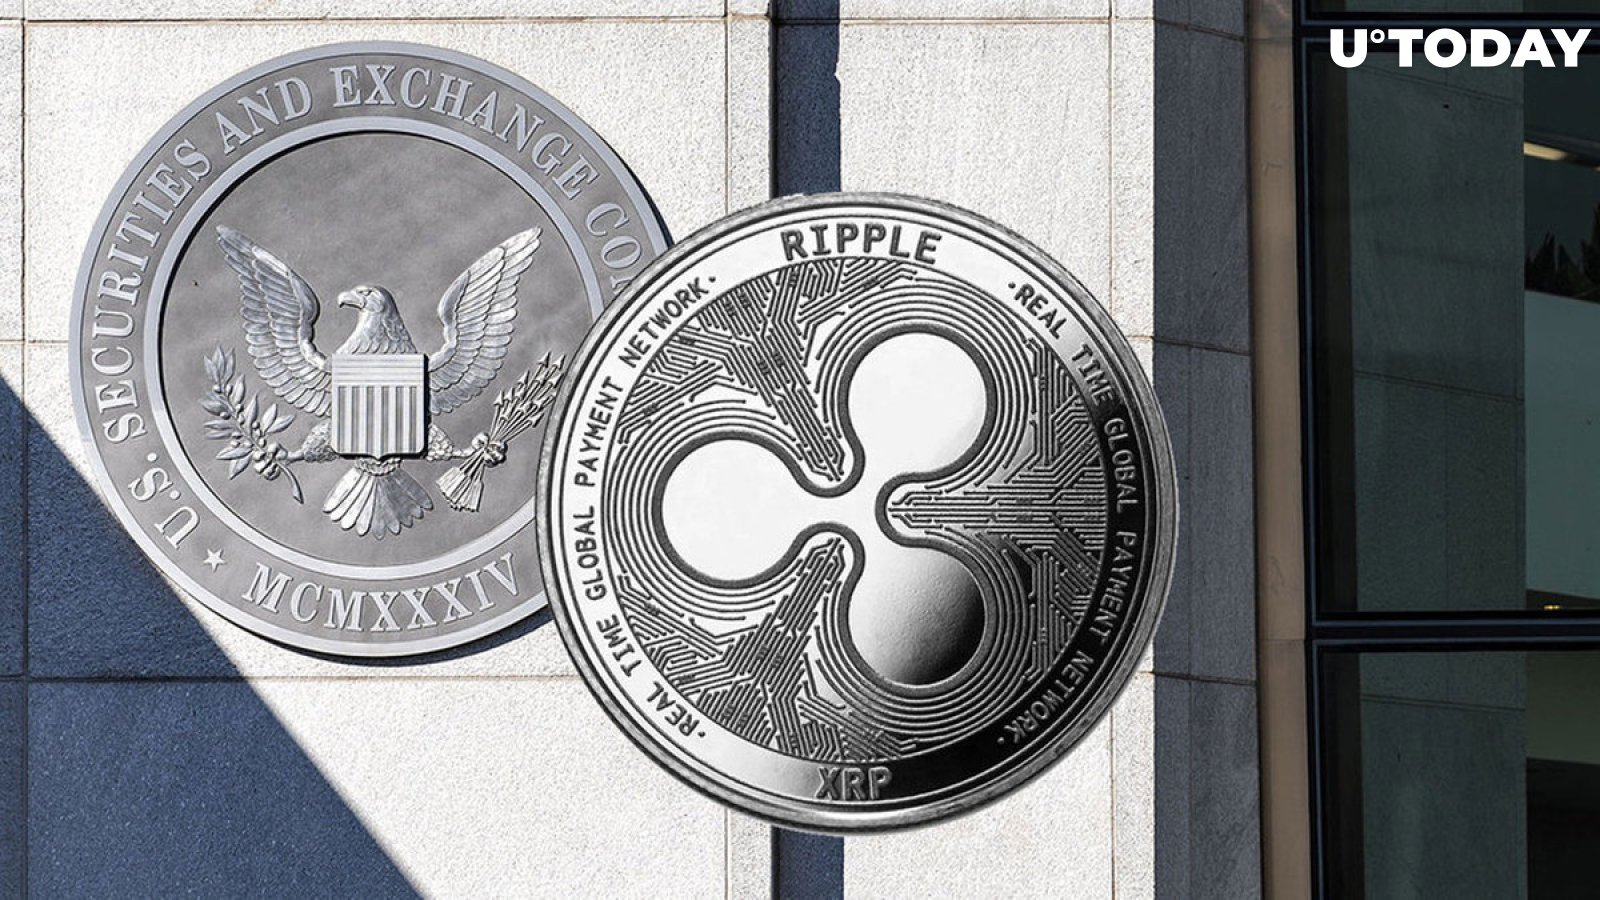 SEC v. XRP: CFTC Commissioner Does Not Support SEC and Visits Ripple CEO